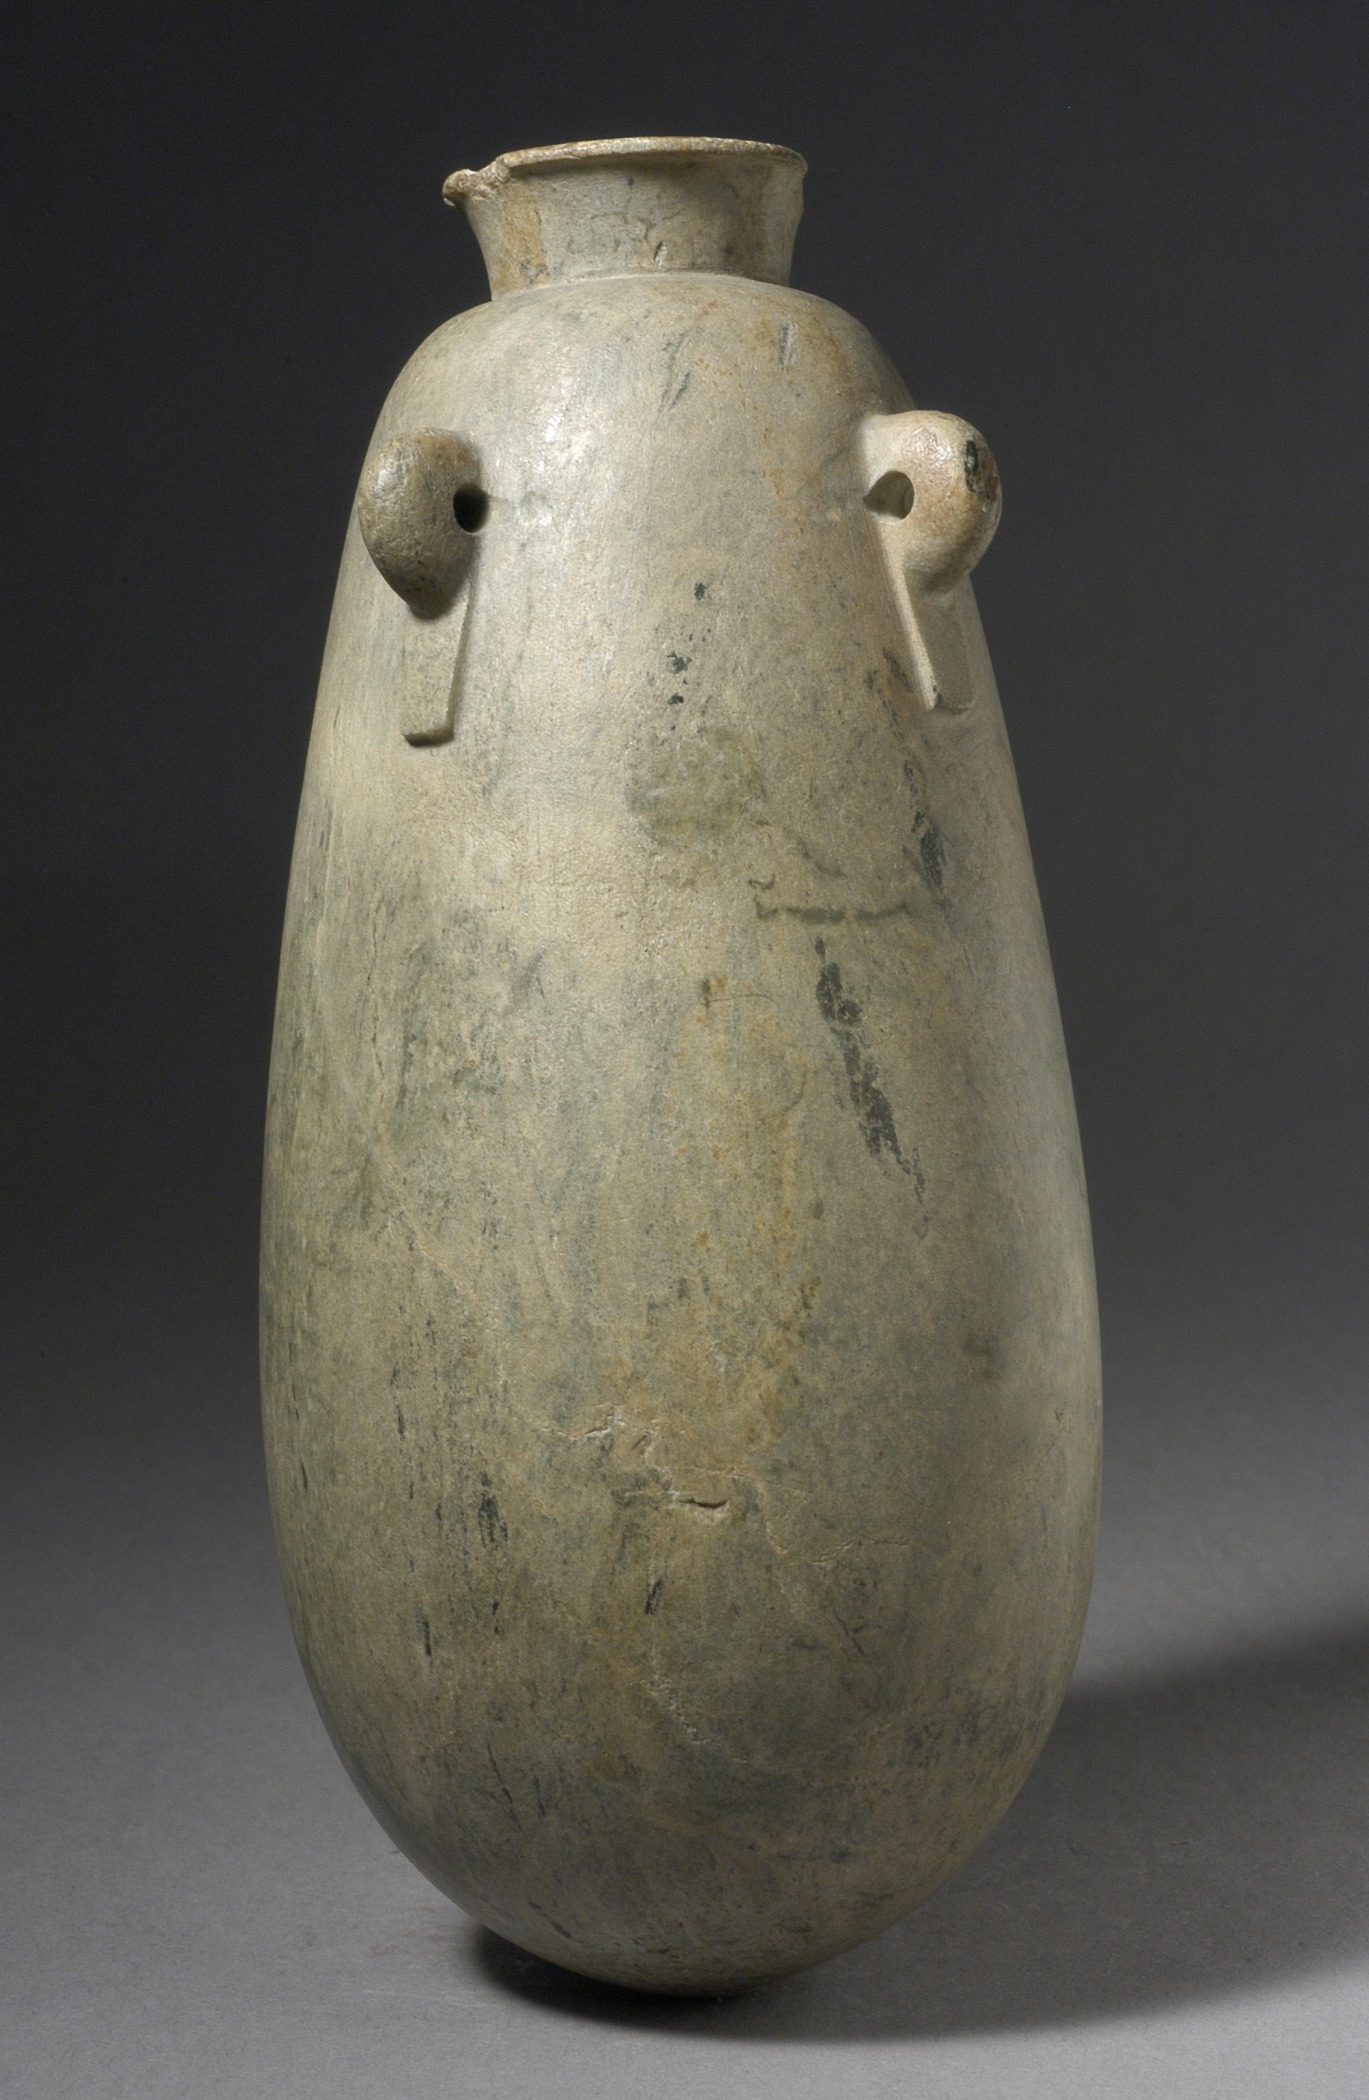 a gray vase sitting on a gray surface